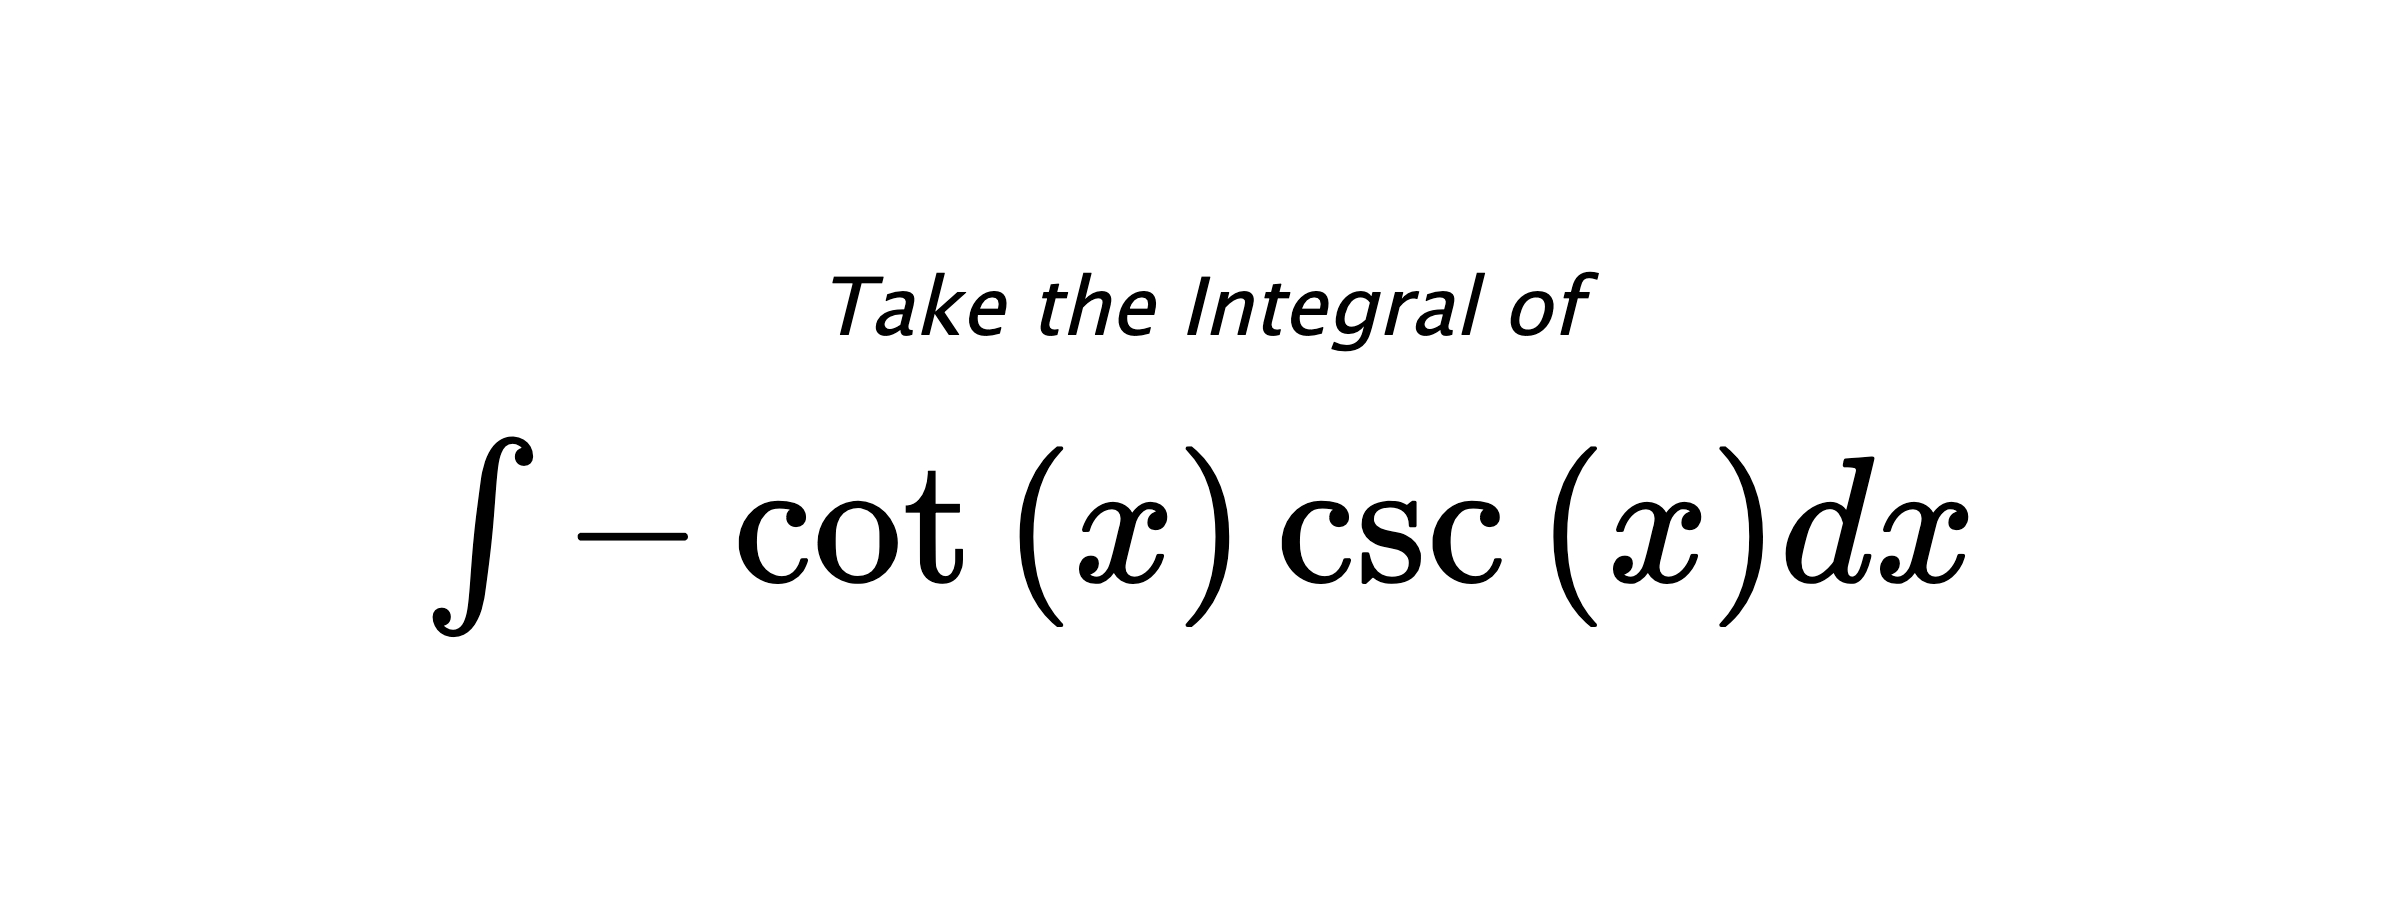 Take the Integral of $ \int - \cot{\left(x \right)} \csc{\left(x \right)} dx $